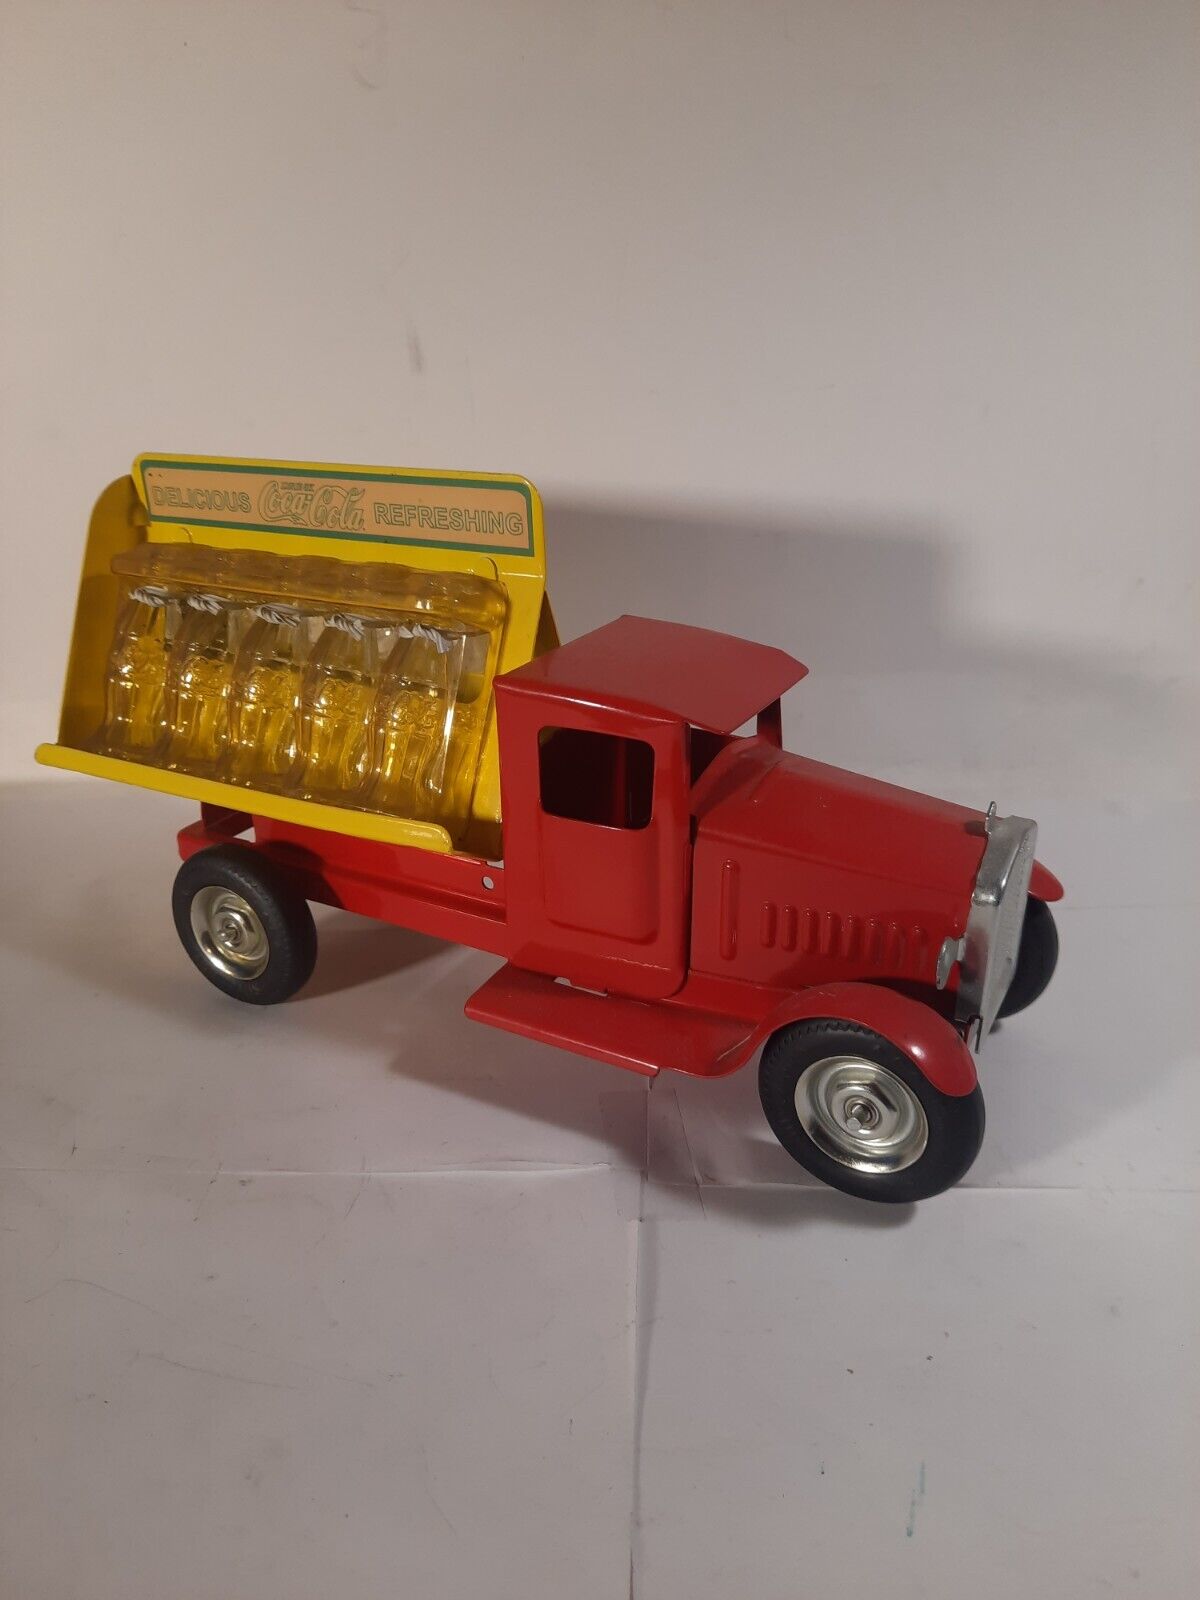 1930s METALCRAFT COCA-COLA DELIVERY TRUCK  REPRODUCTION Gearbox EX Cond.